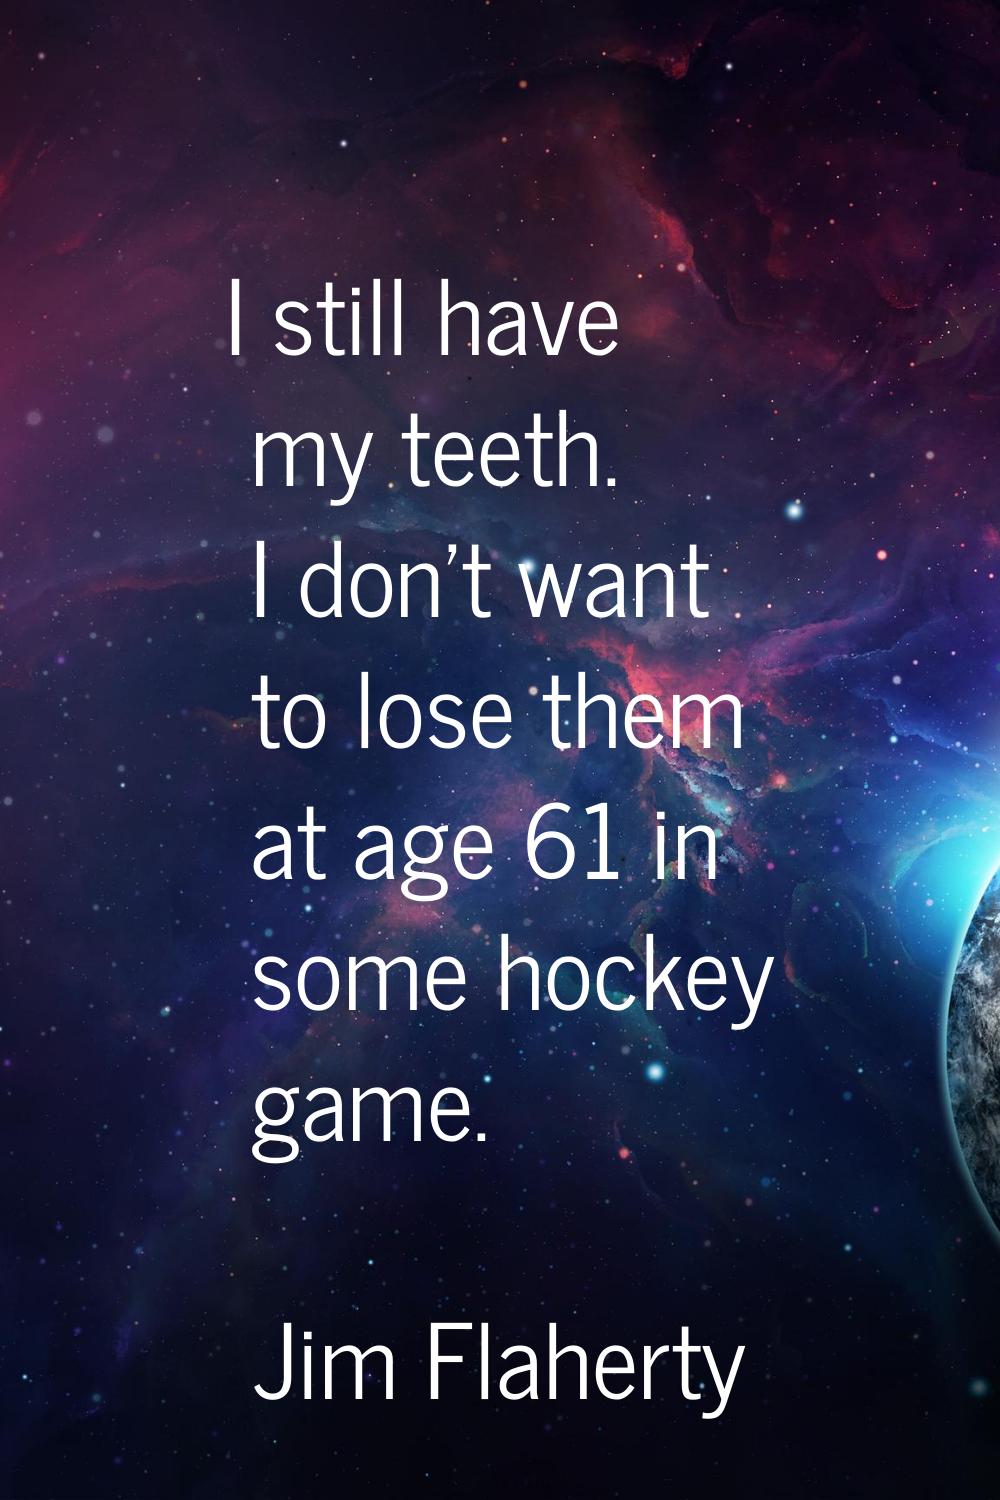 I still have my teeth. I don't want to lose them at age 61 in some hockey game.